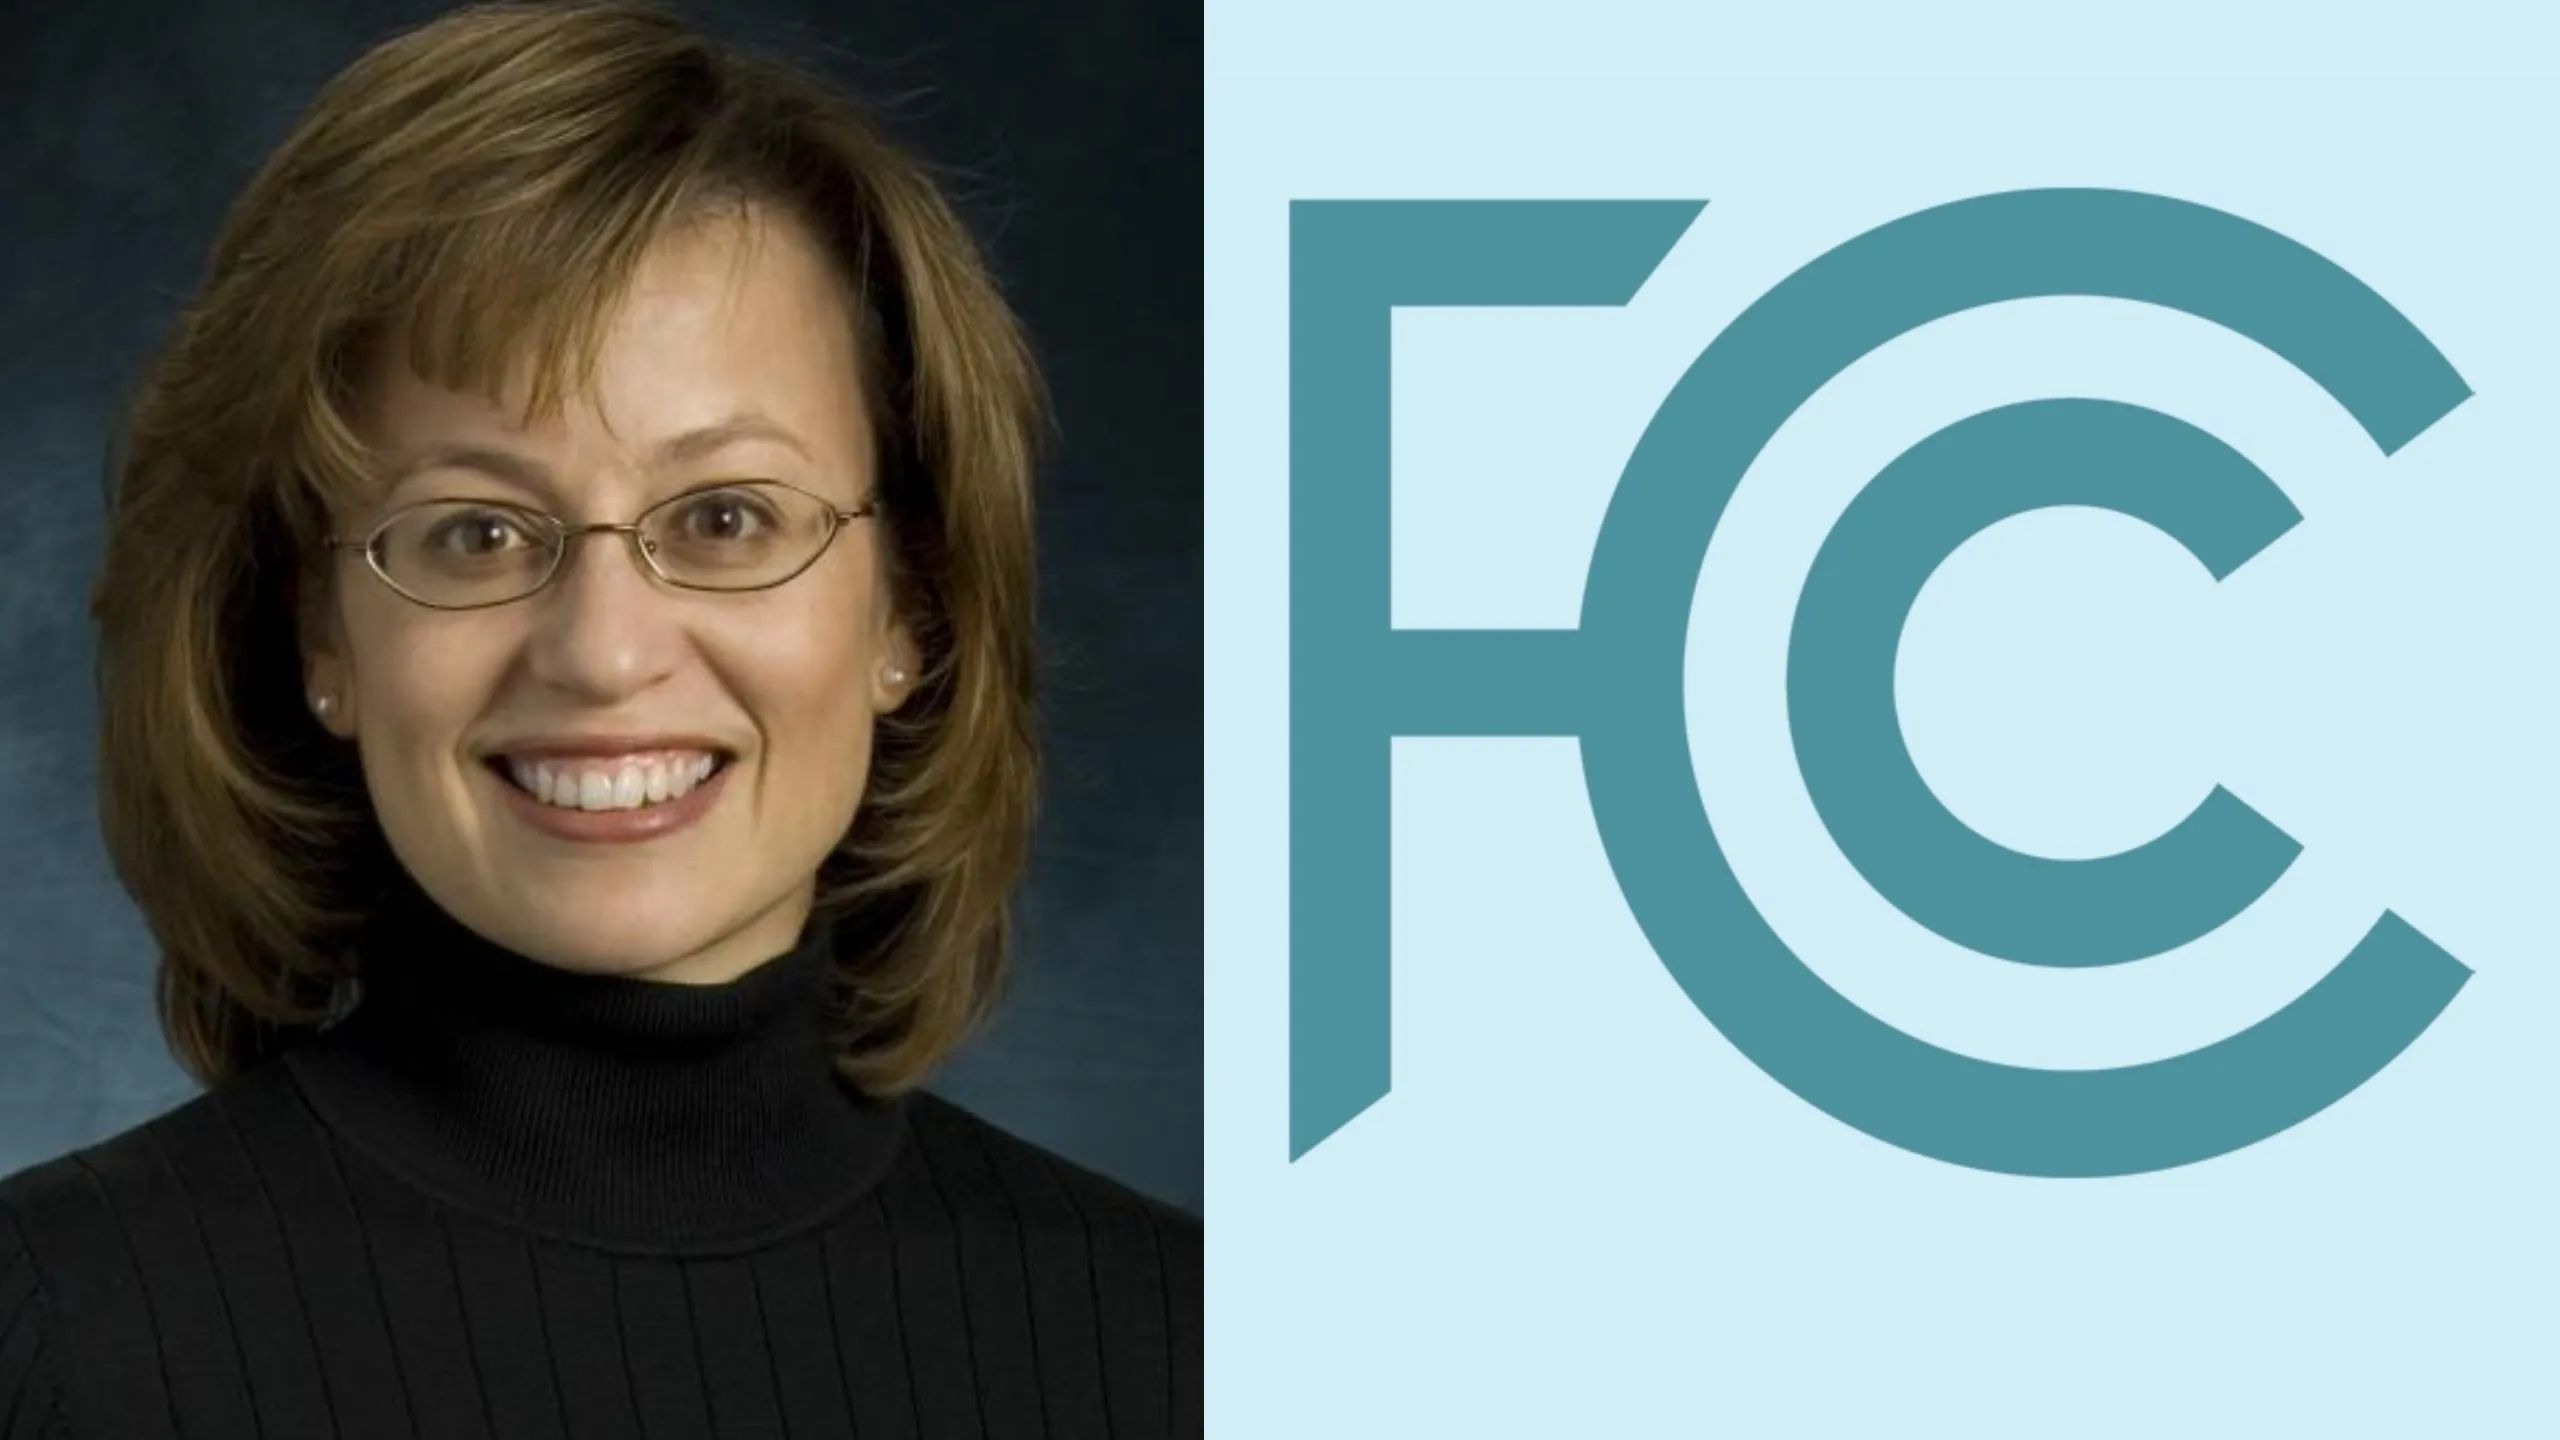 fcc-welcomes-anna-gomez-as-its-fifth-commissioner